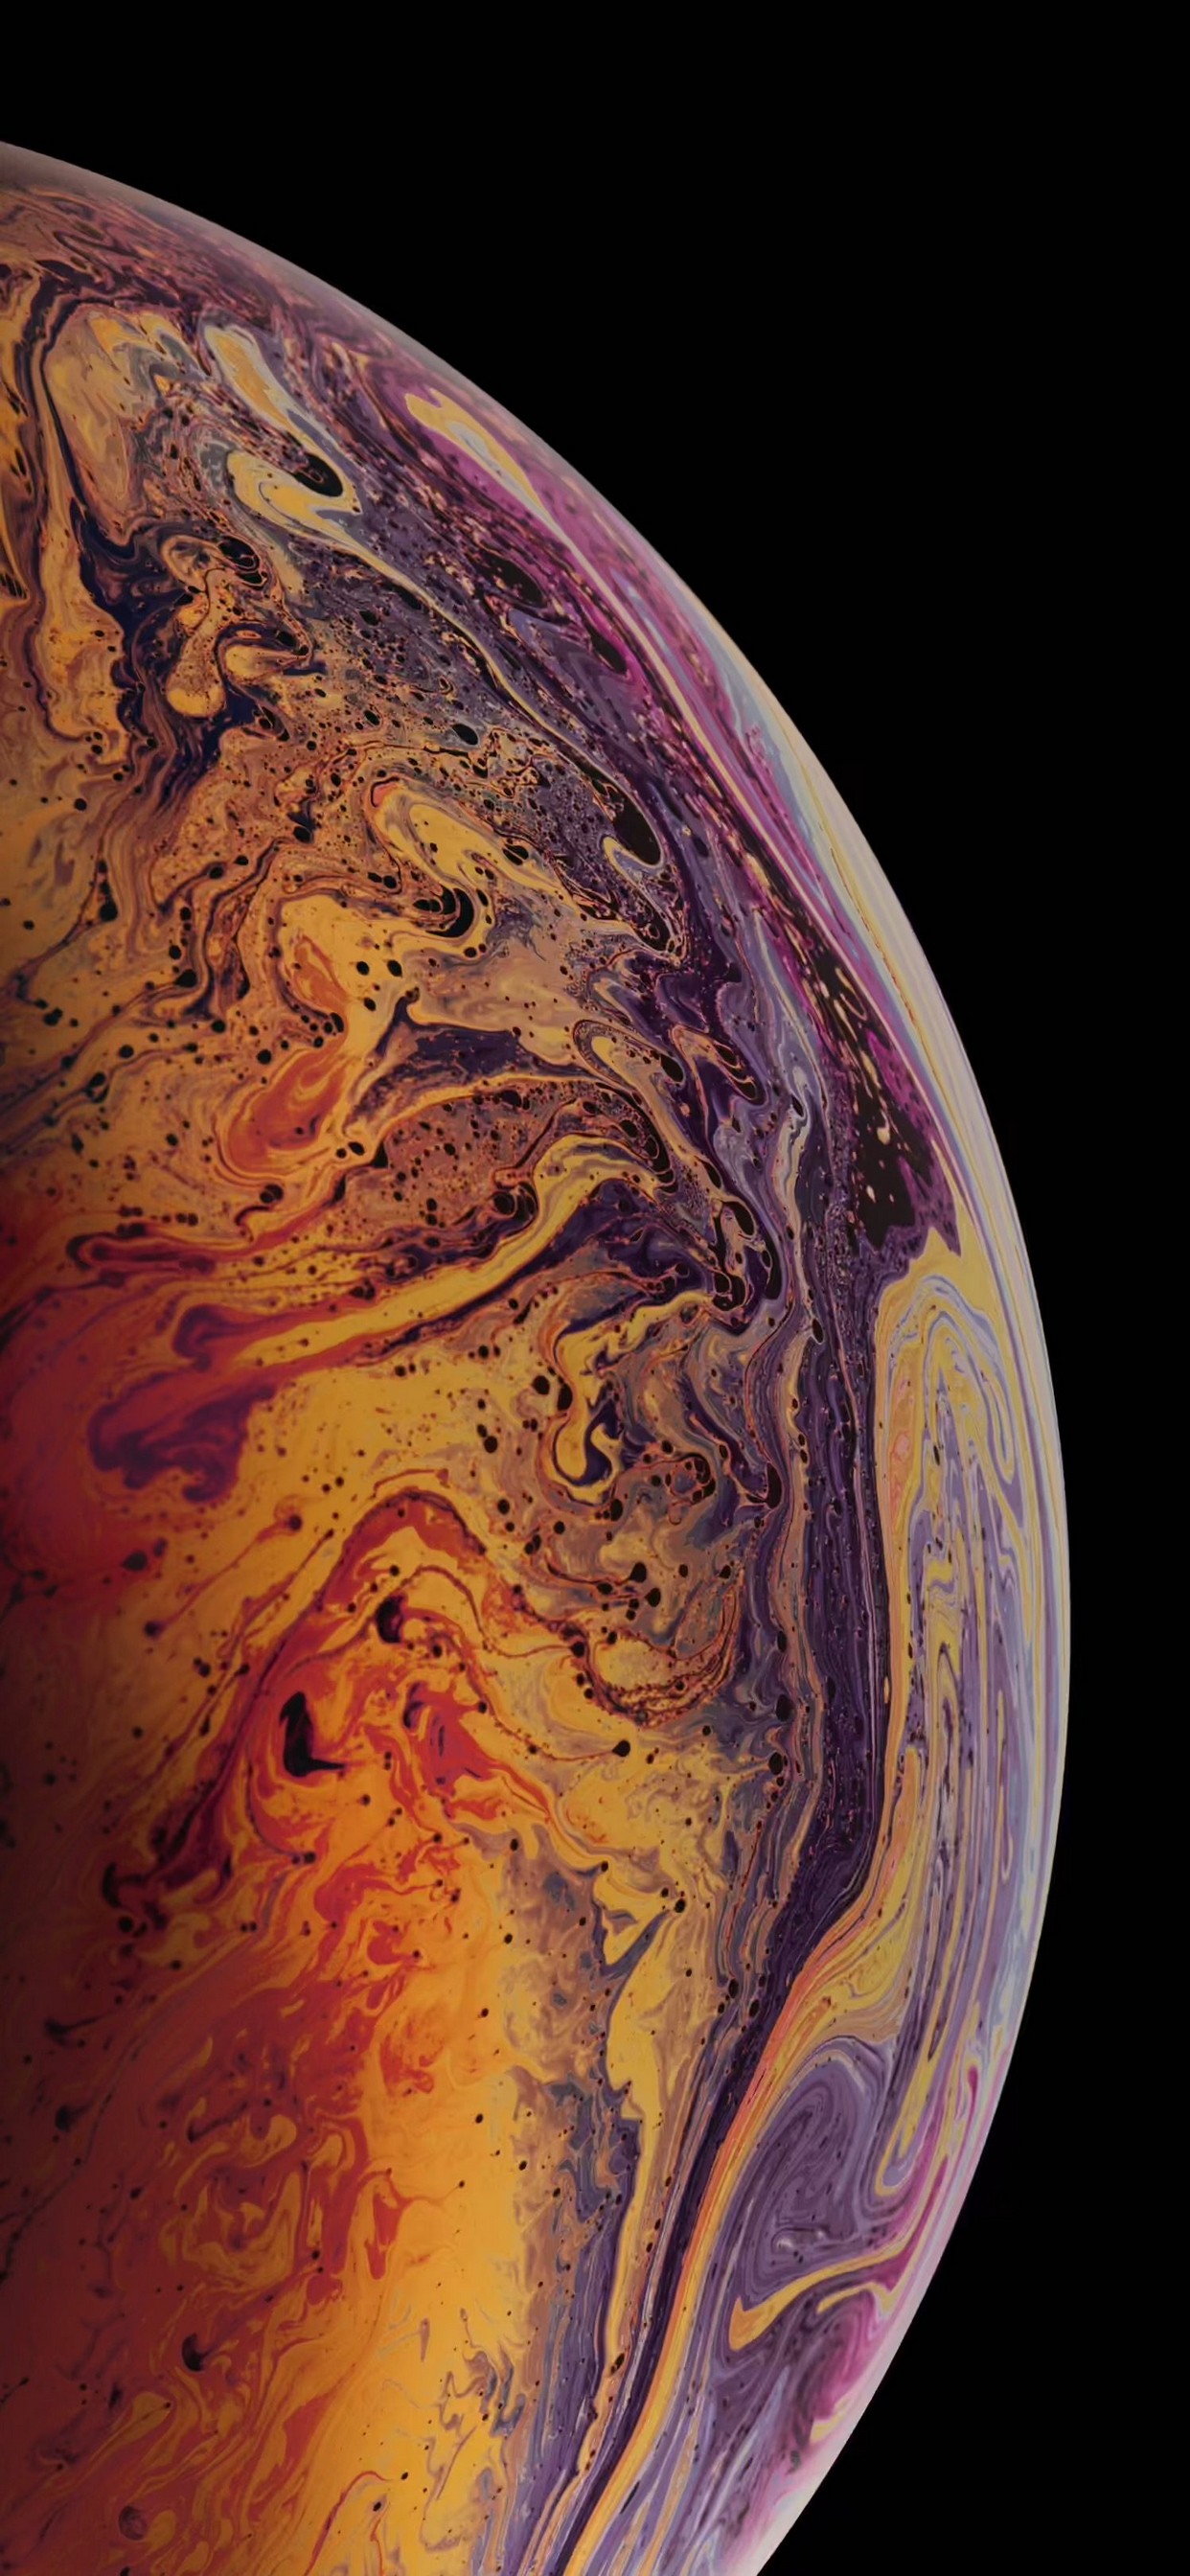 iPhone XS Max Home Screen Wallpaper With high-resolution 1242X2688 pixel. You can set as wallpaper for Apple iPhone X, XS Max, XR, 8, 7, 6, SE, iPad. Enjoy and share your favorite HD wallpapers and background images